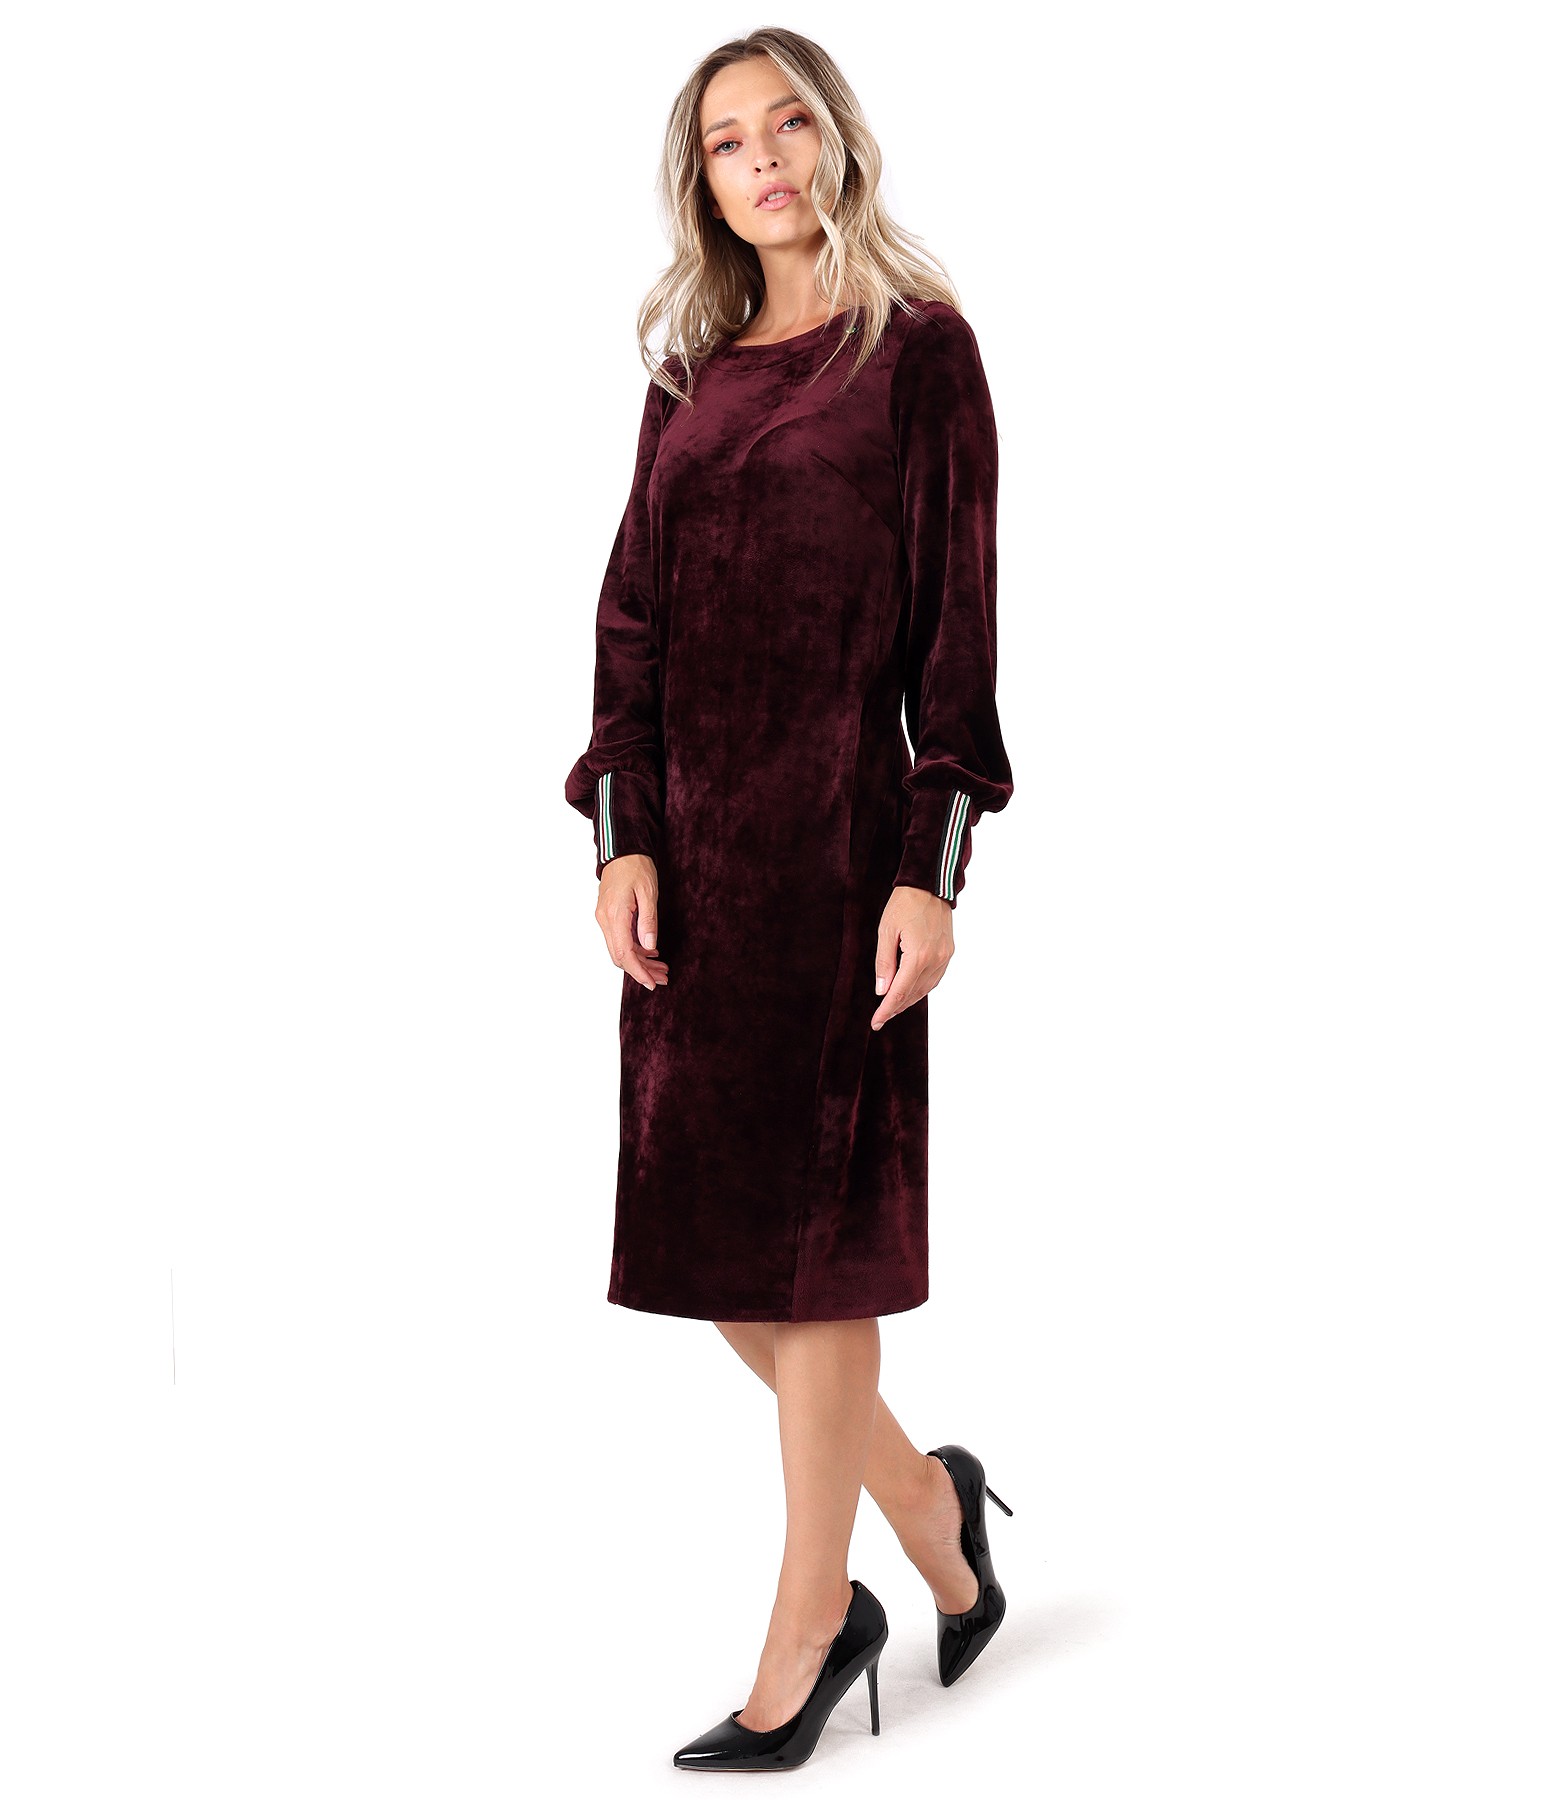 Velvet dress with elastic lining - the cuffs on red YOKKO